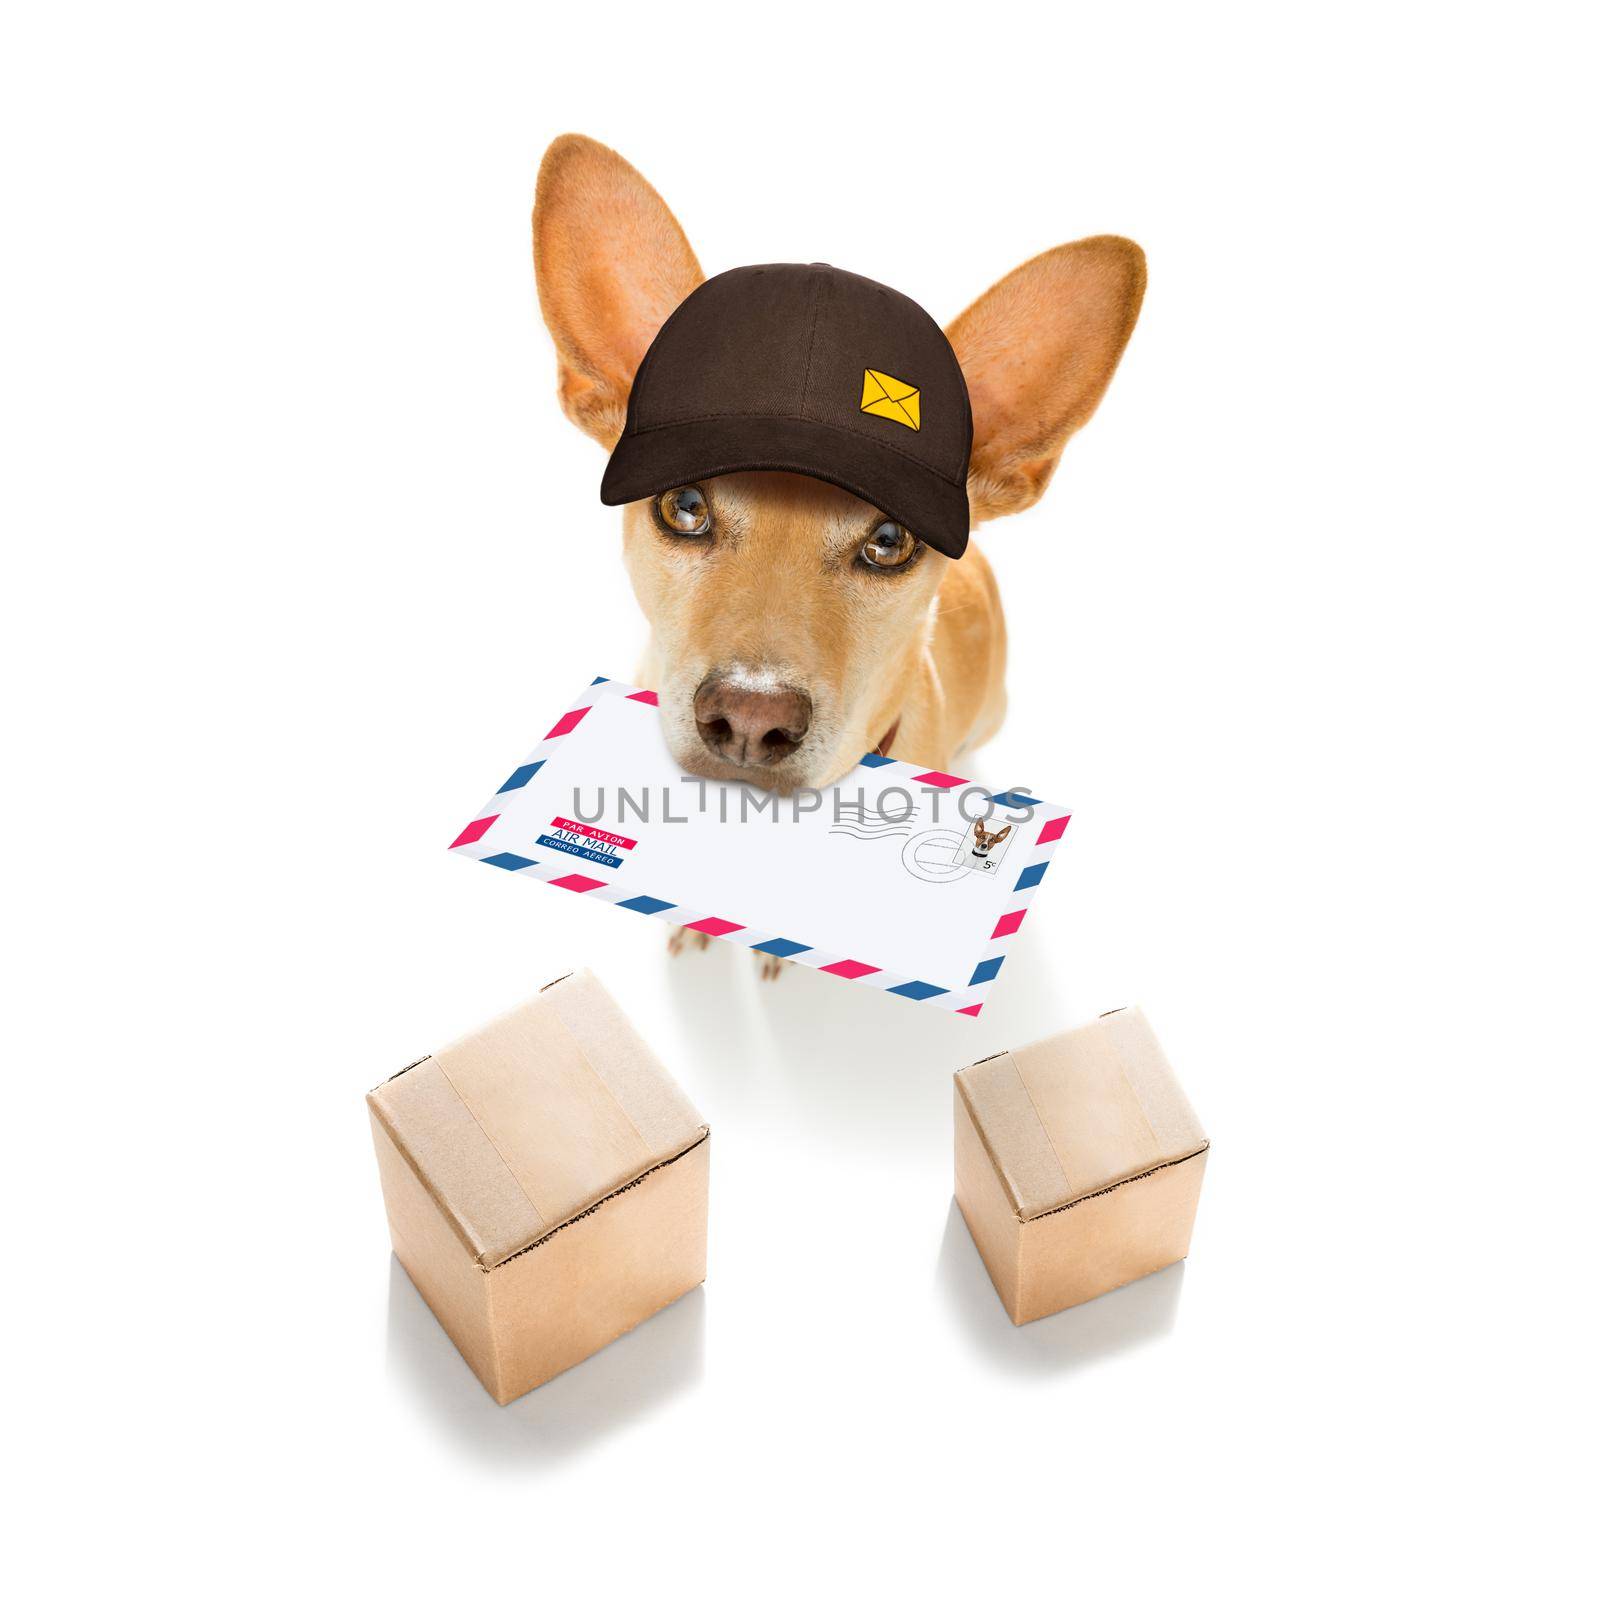 postman chihuahua dog delivering a big white blank empty envelope, with boxes and packages